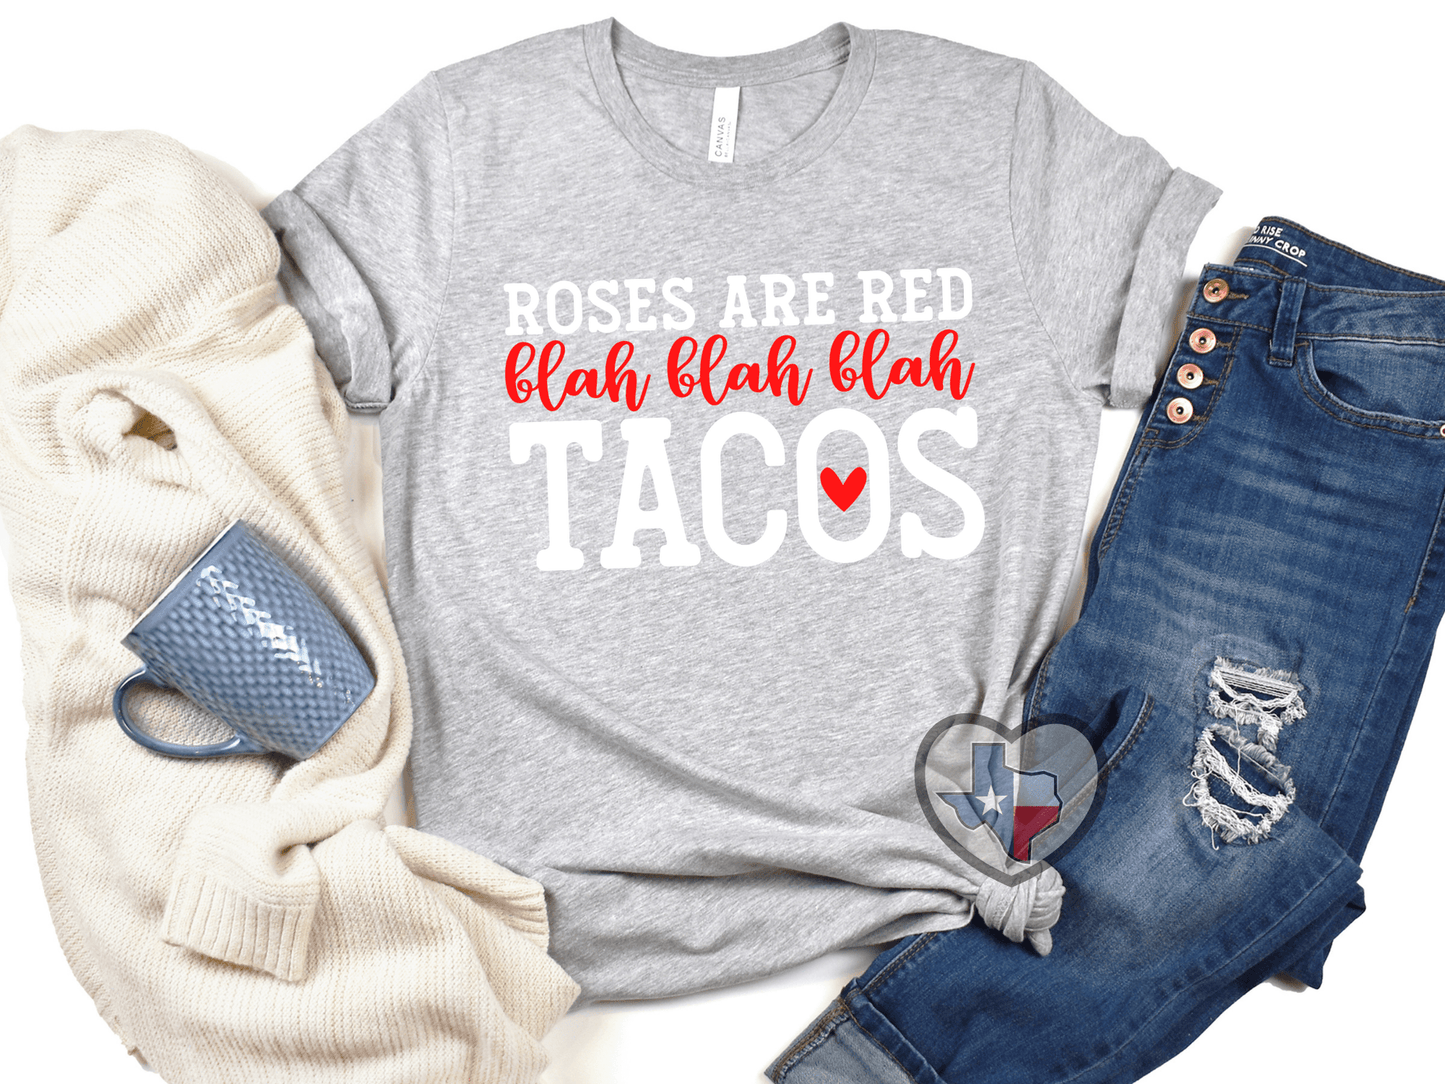 Roses Are Red. Blah. Tacos. - Texas Transfers and Designs